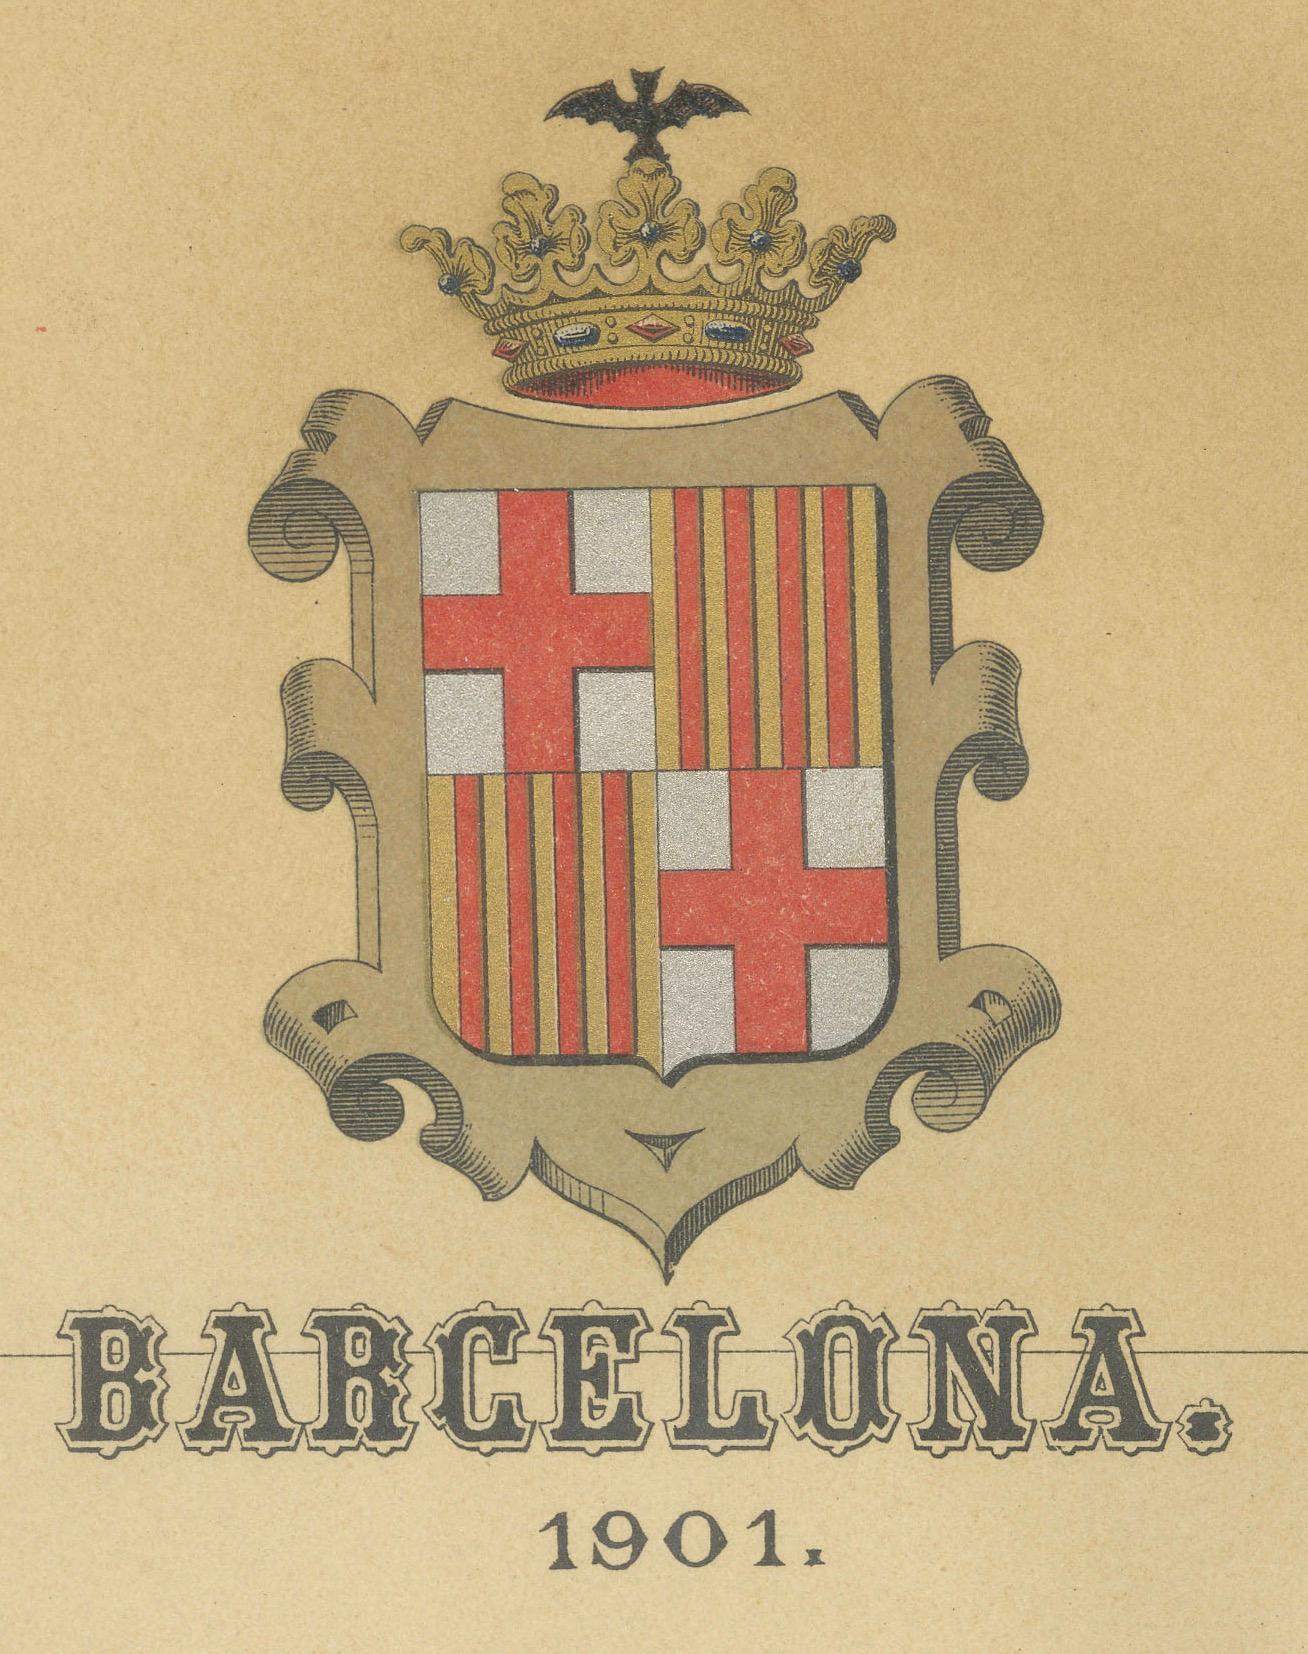 Paper Barcelona 1901: A Cartographic Portrait of Catalonia's Capital Province For Sale